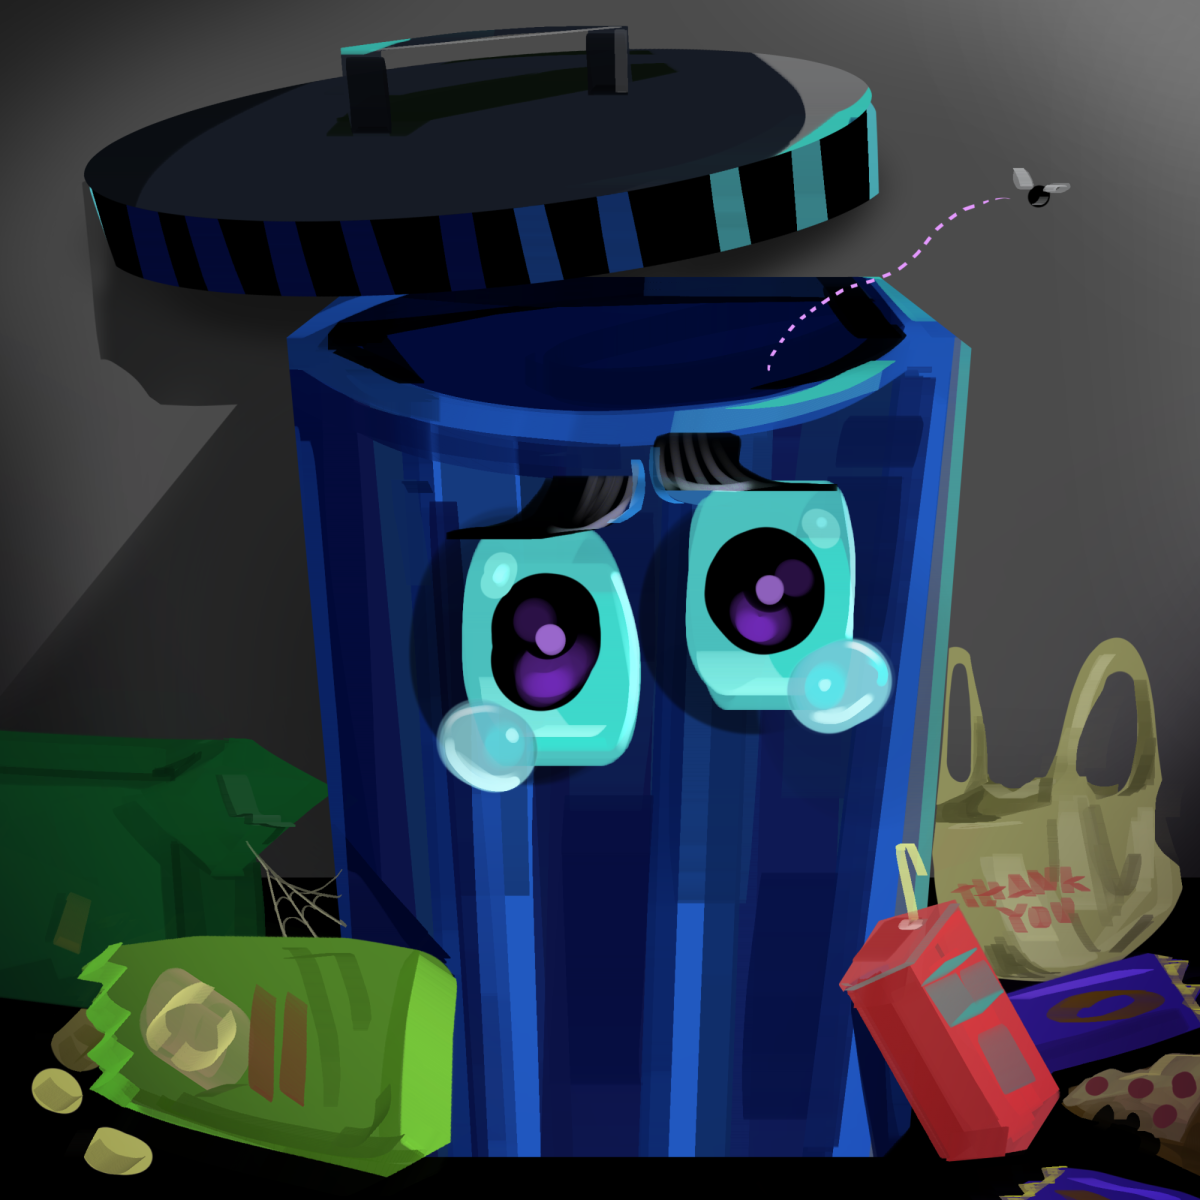 TRASH TALK: After years of mistreatment, trash and cans speak up about their neglected feelings.